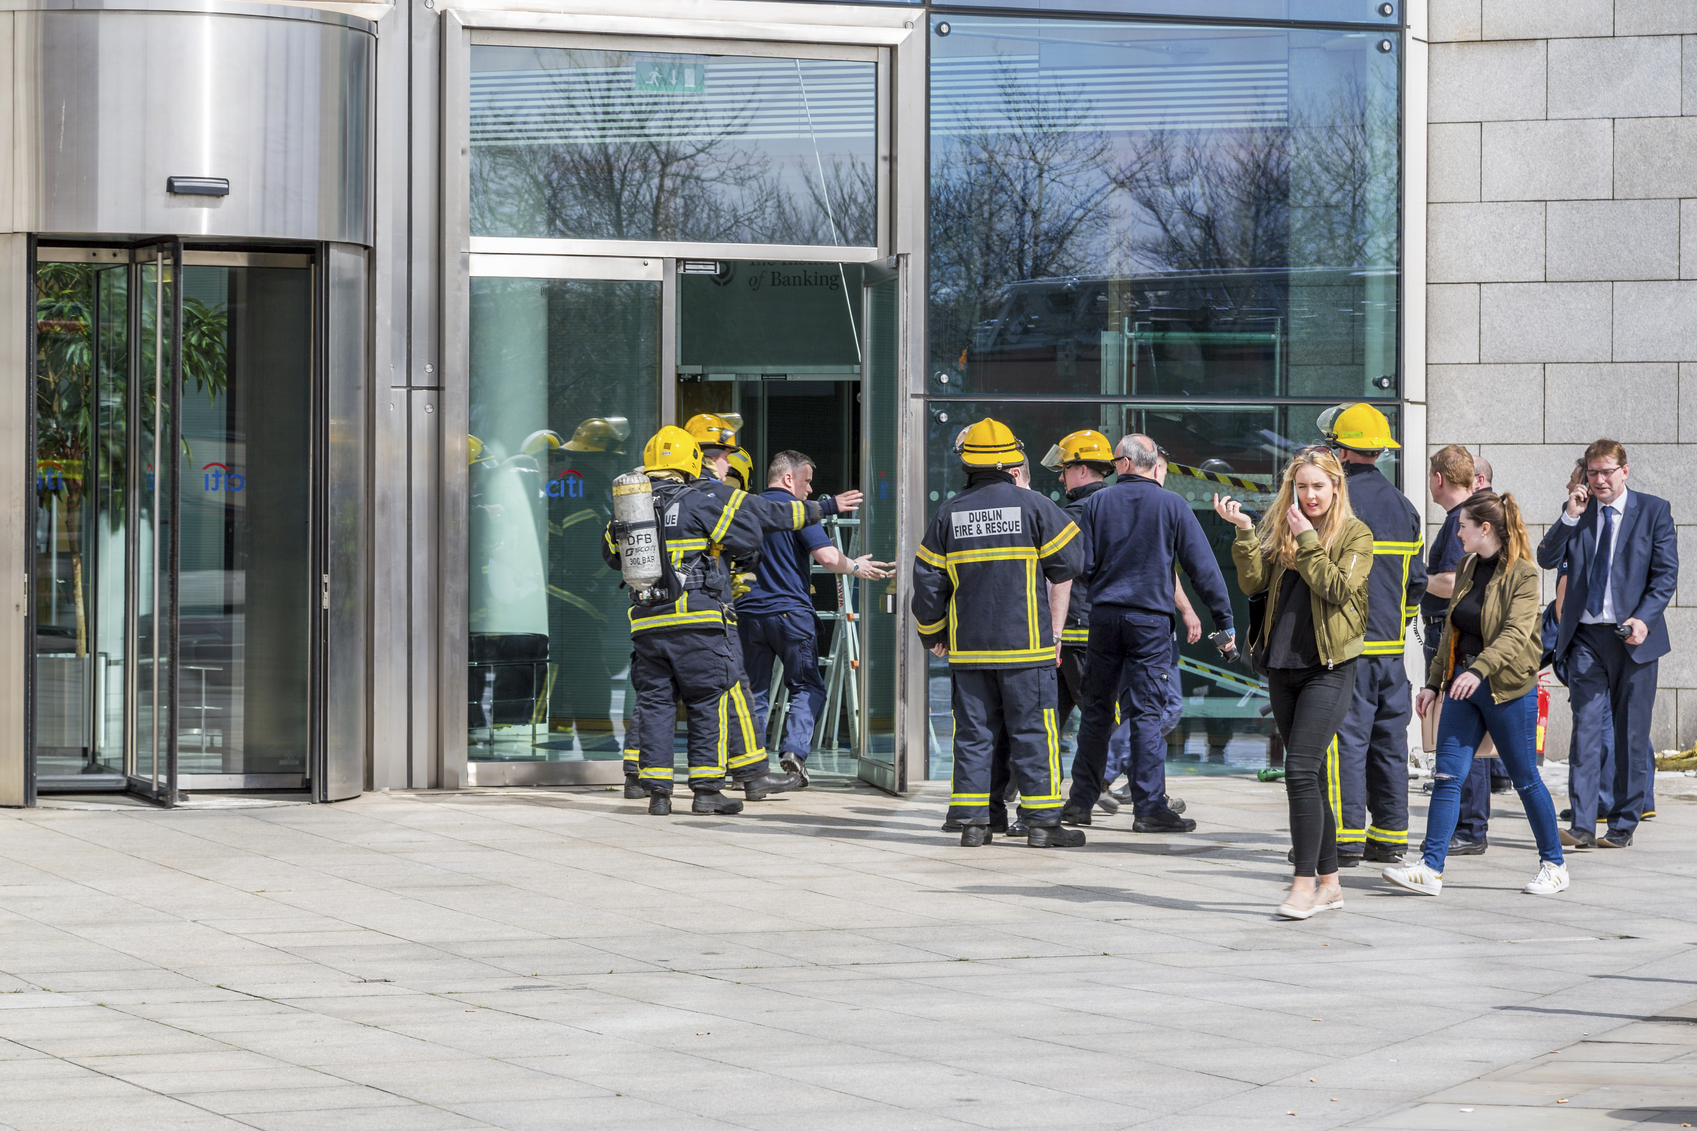 Read more about the article Types of Workplace Emergencies and How to Handle Them